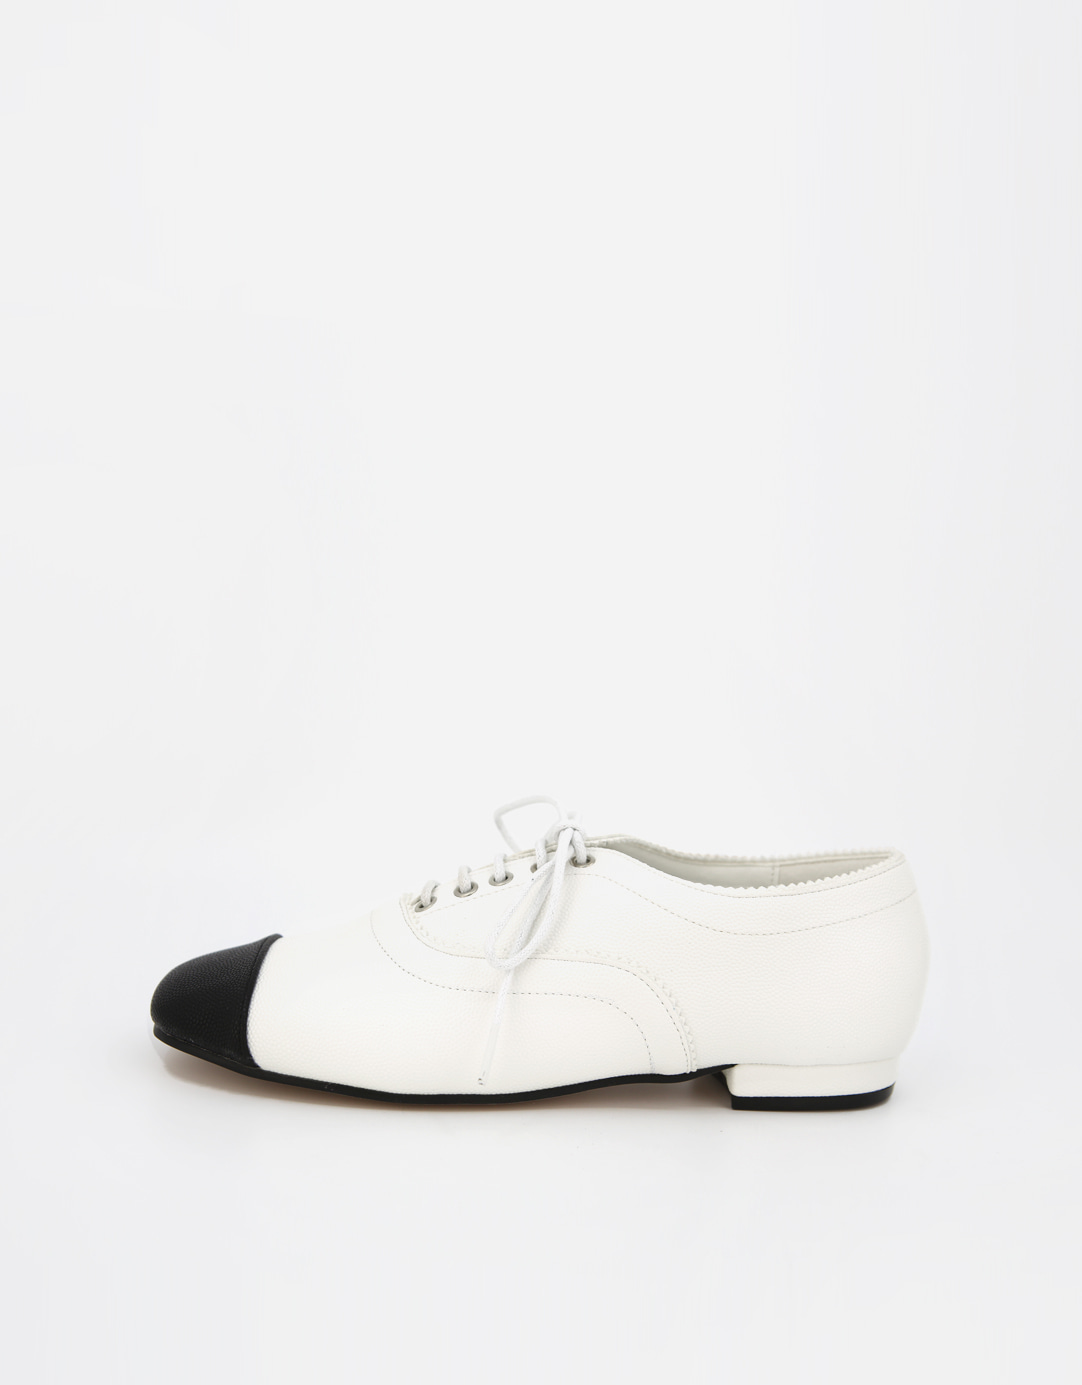 LACE UP LOAFER